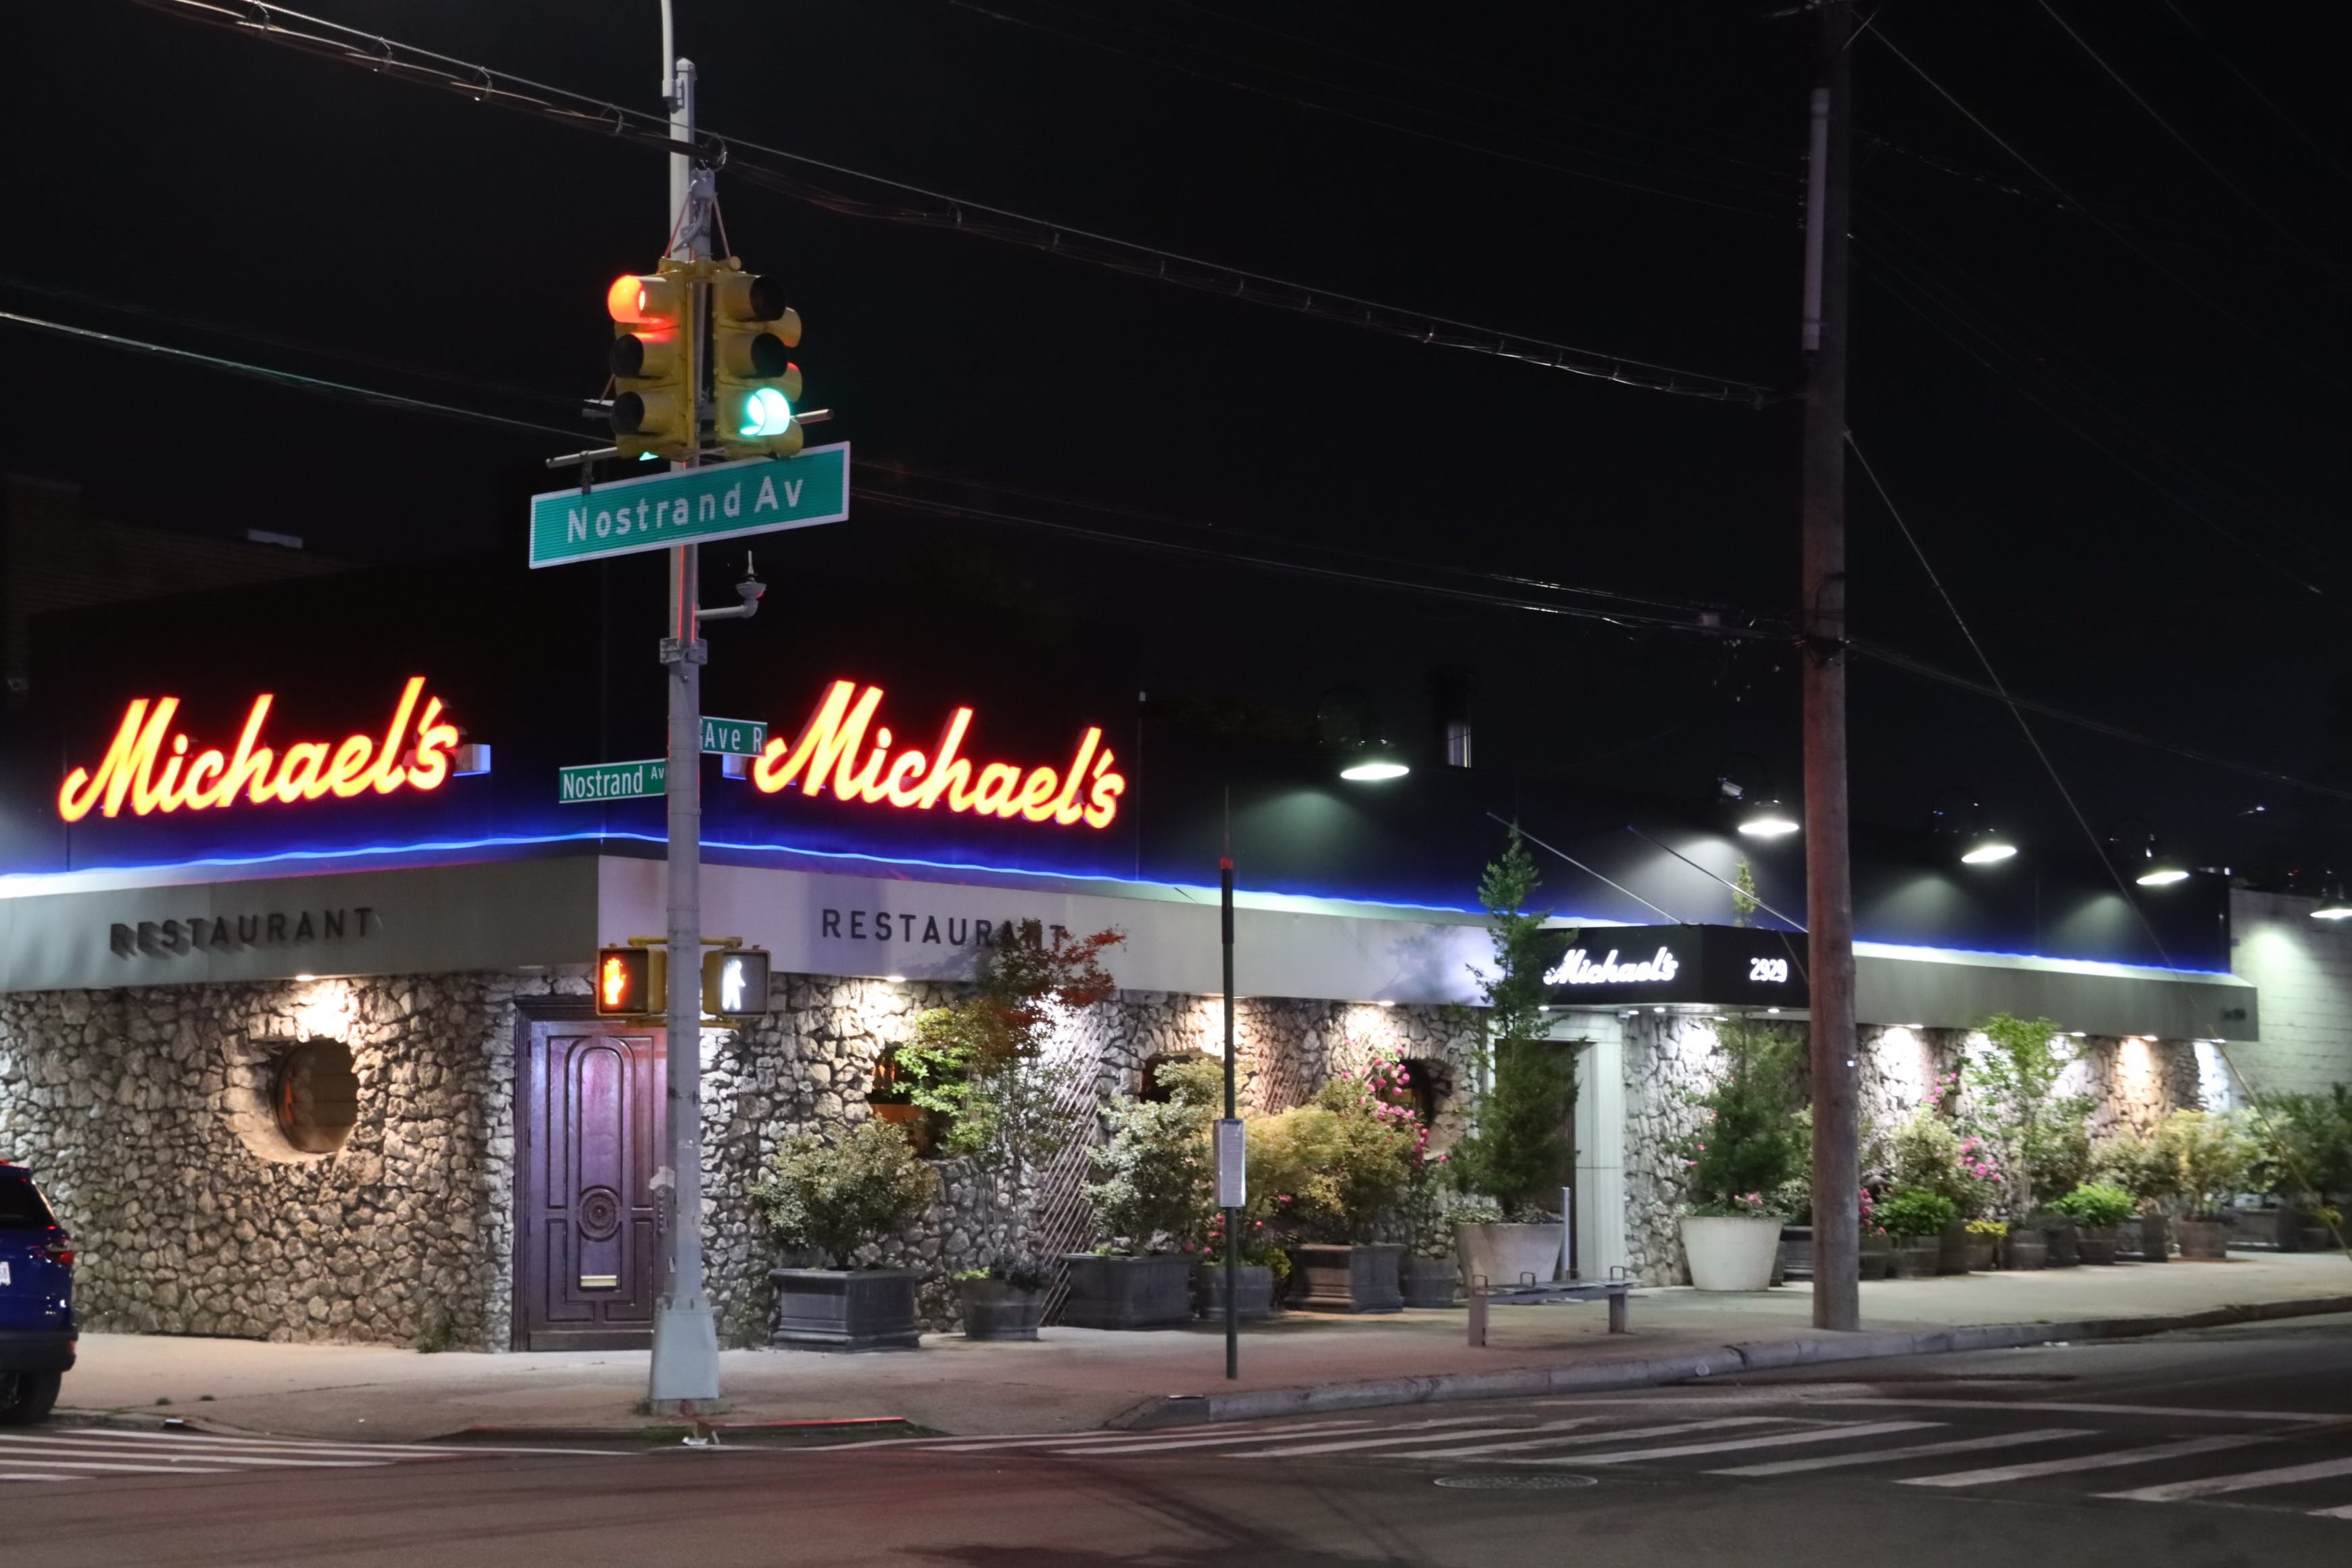 Michael's New York: Overrated, Expensive and Not Worth Trying